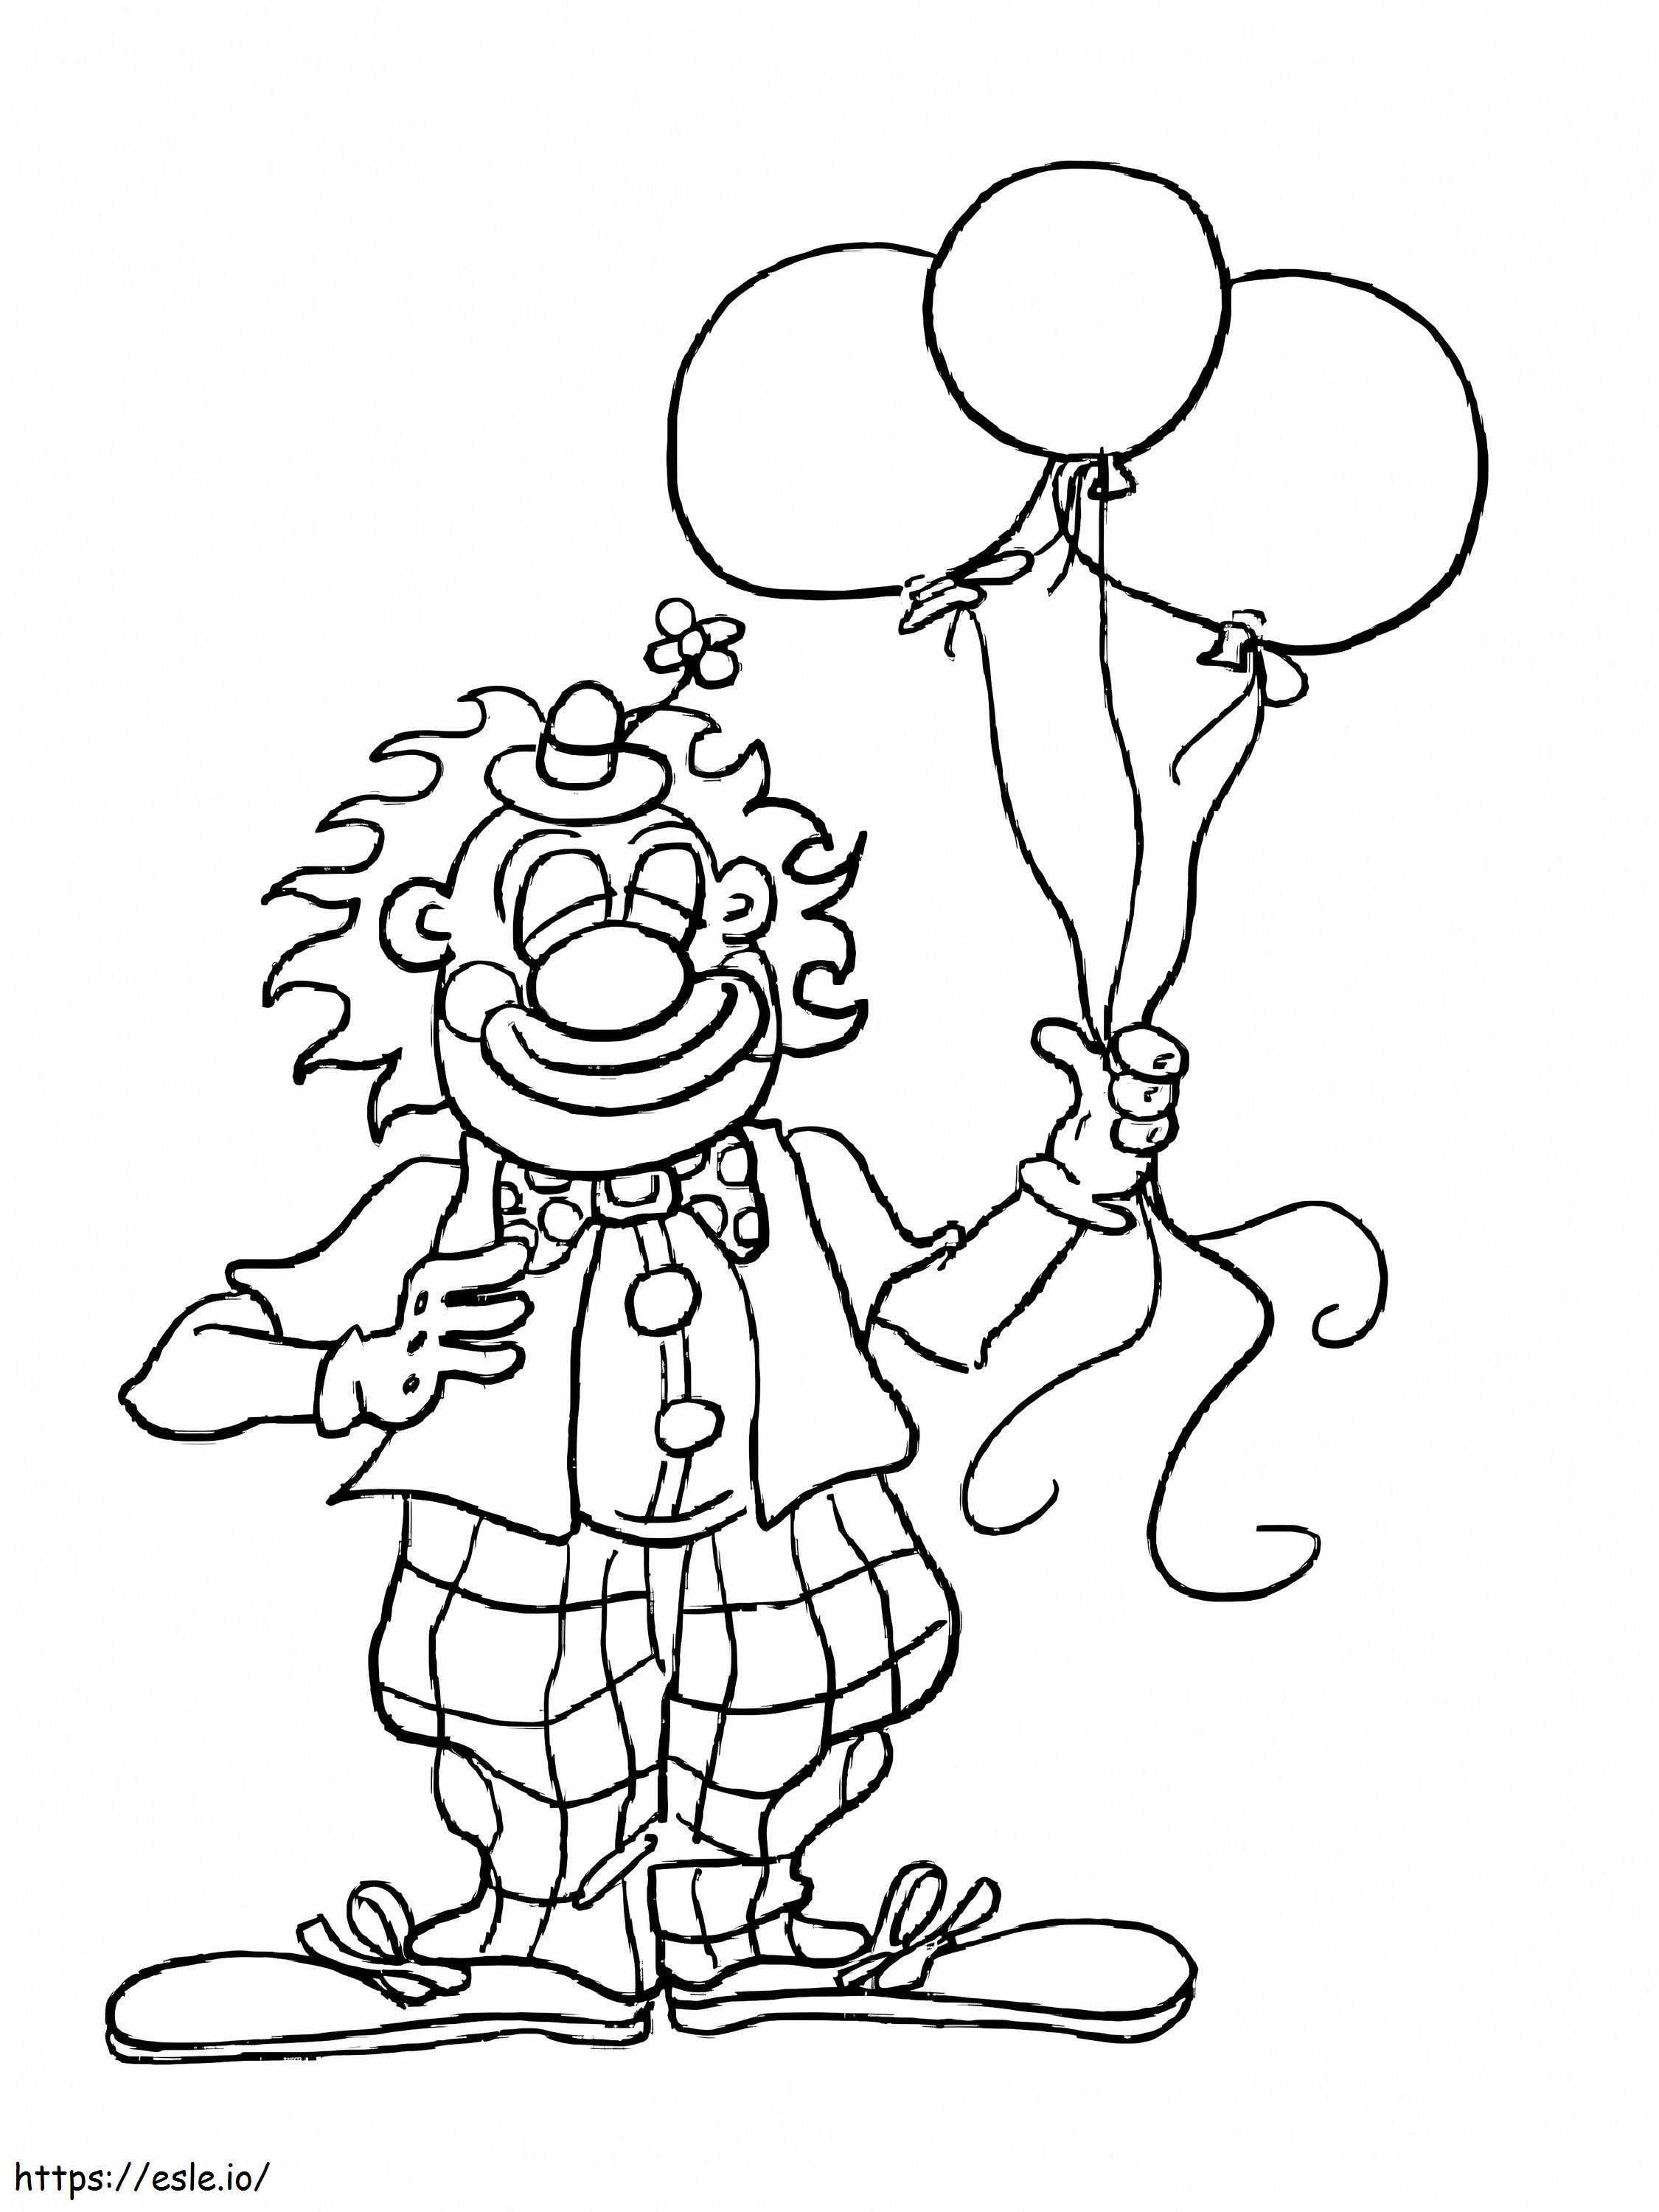 Clown With Balloon coloring page